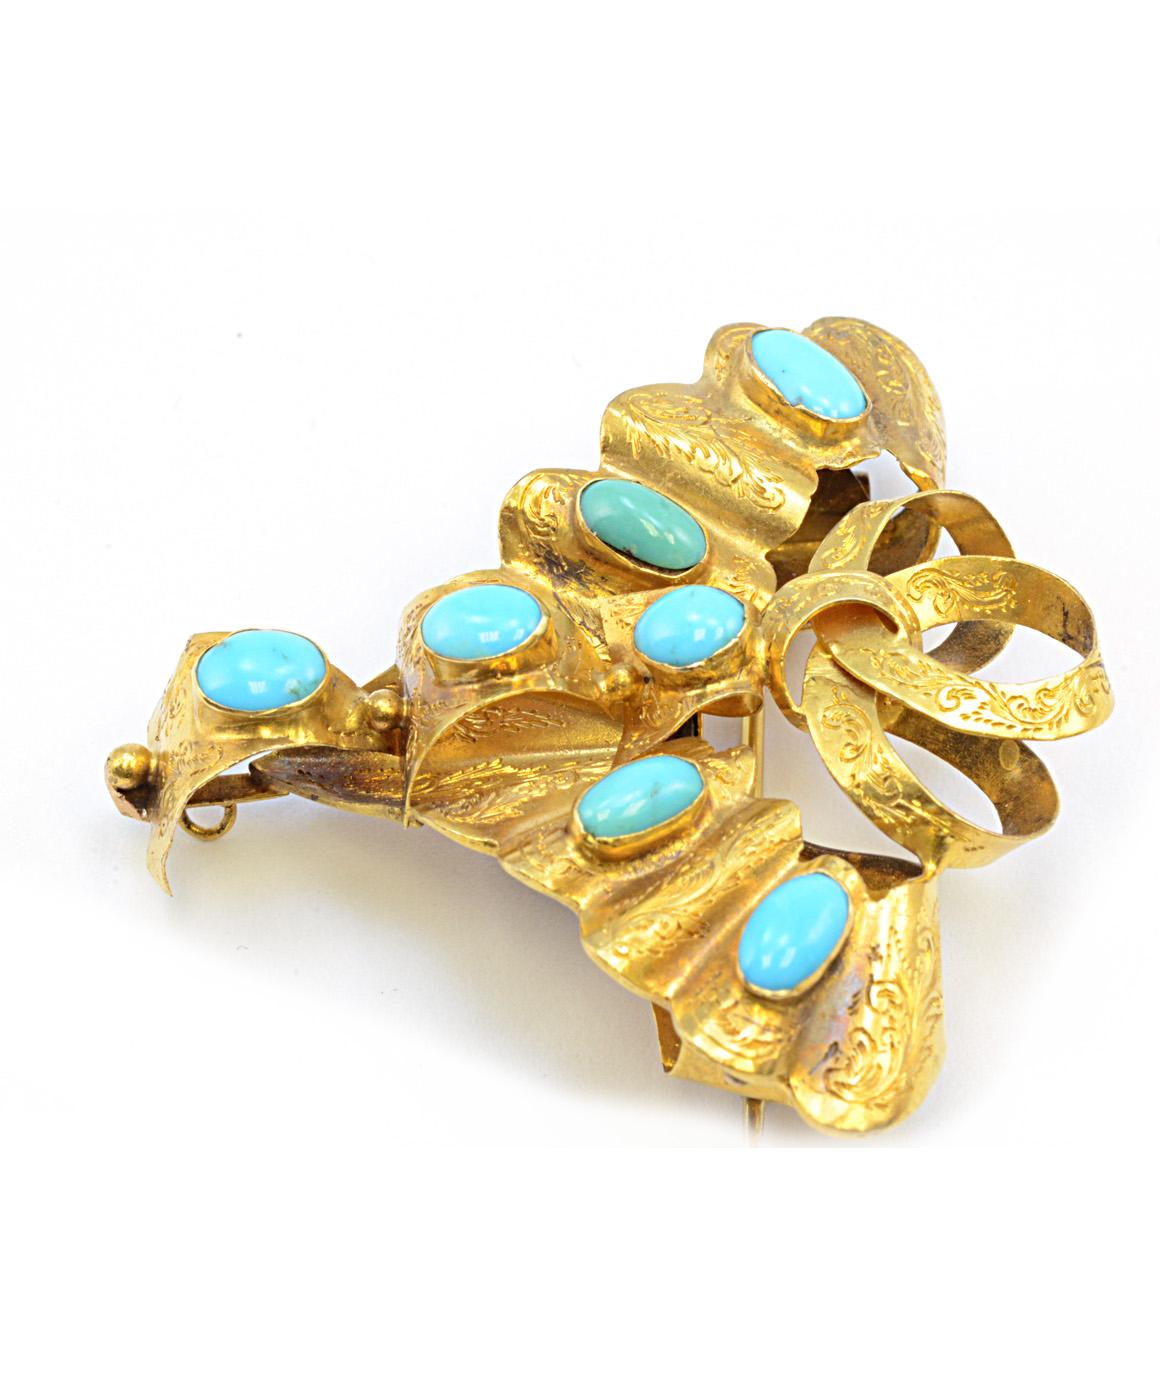 Women's or Men's Solid 18 Karat Yellow Gold Victorian Turquoise Mourning Pin 7.0g